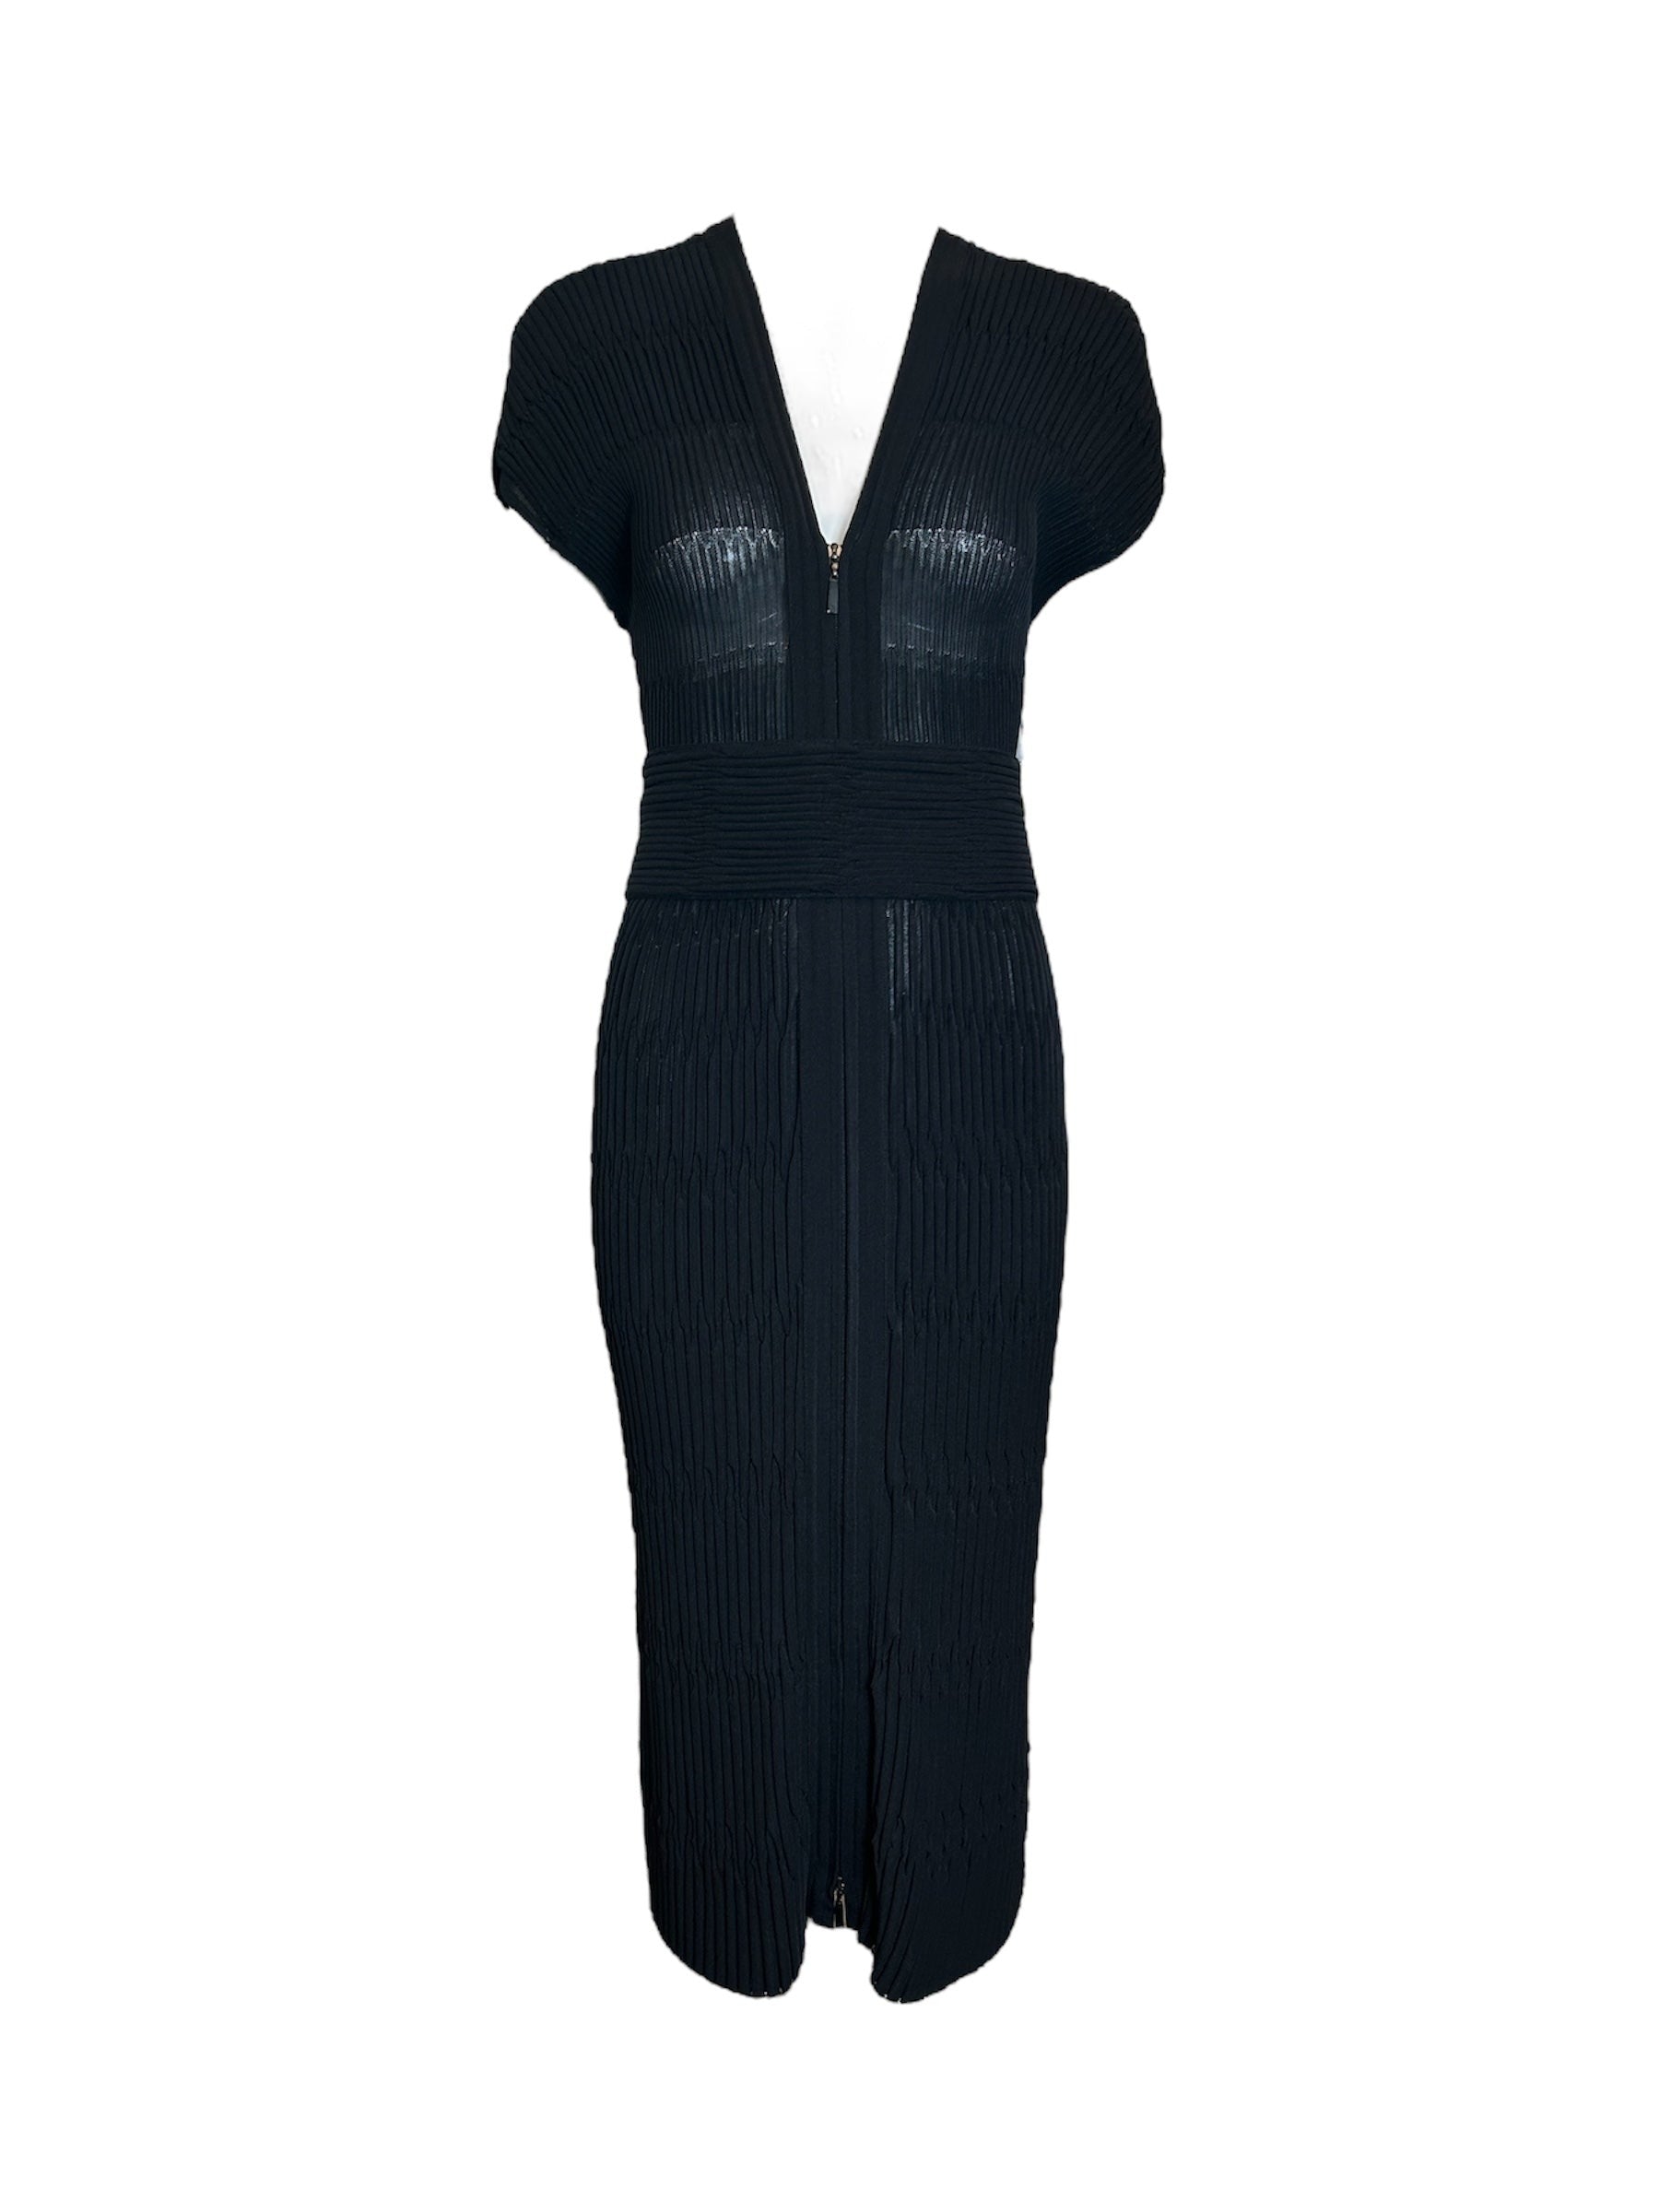 CHANEL Black Pleated Bodycon Dress + Belt FRONT PHOTO 1 OF 7